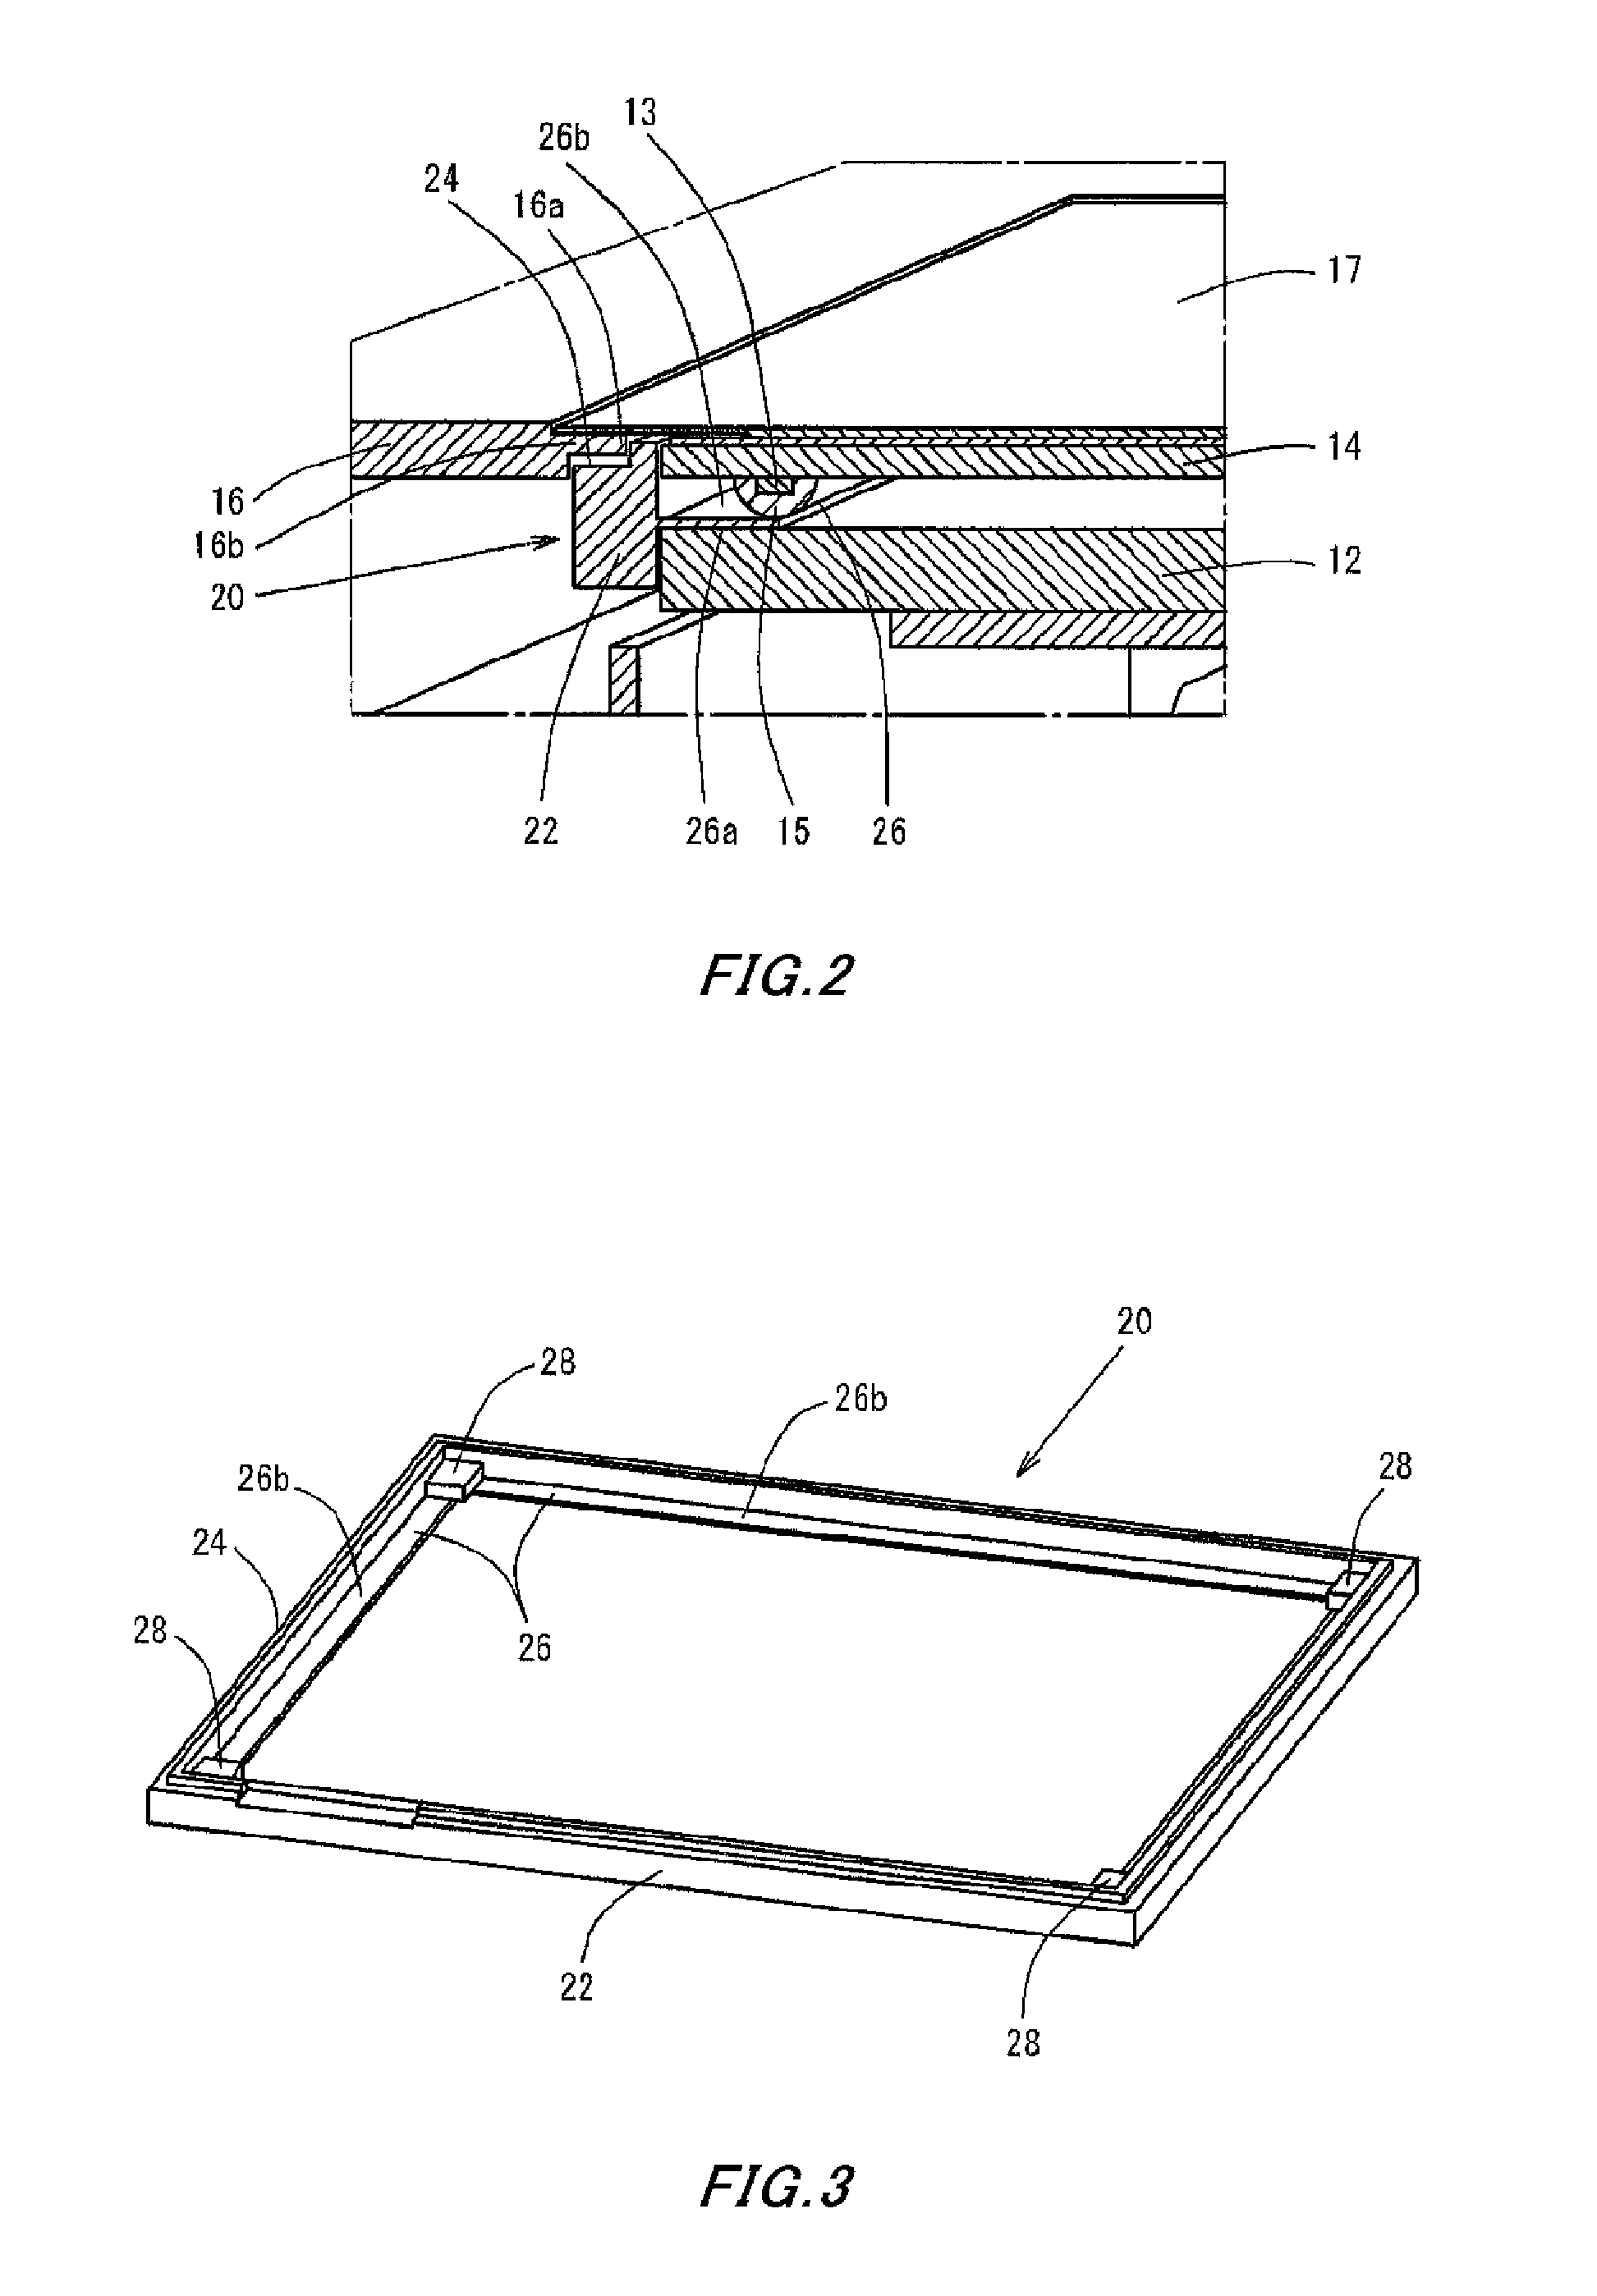 Holding structure for a touch panel